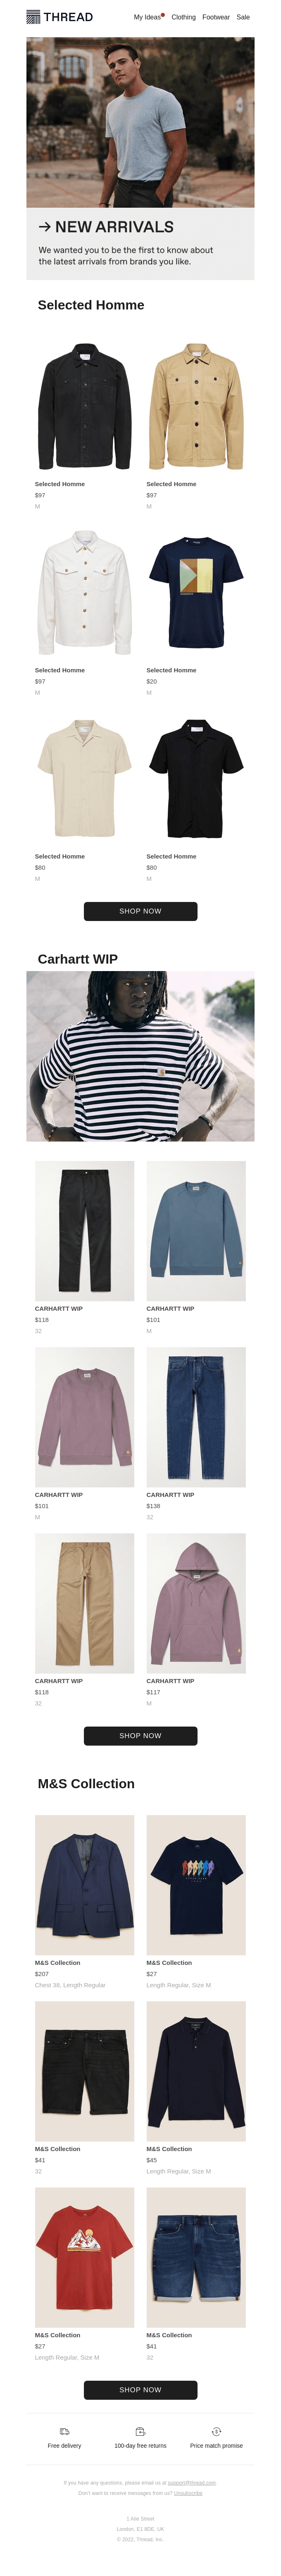 Shop new arrivals from Selected Homme, M&S Collection and Carhartt WIP